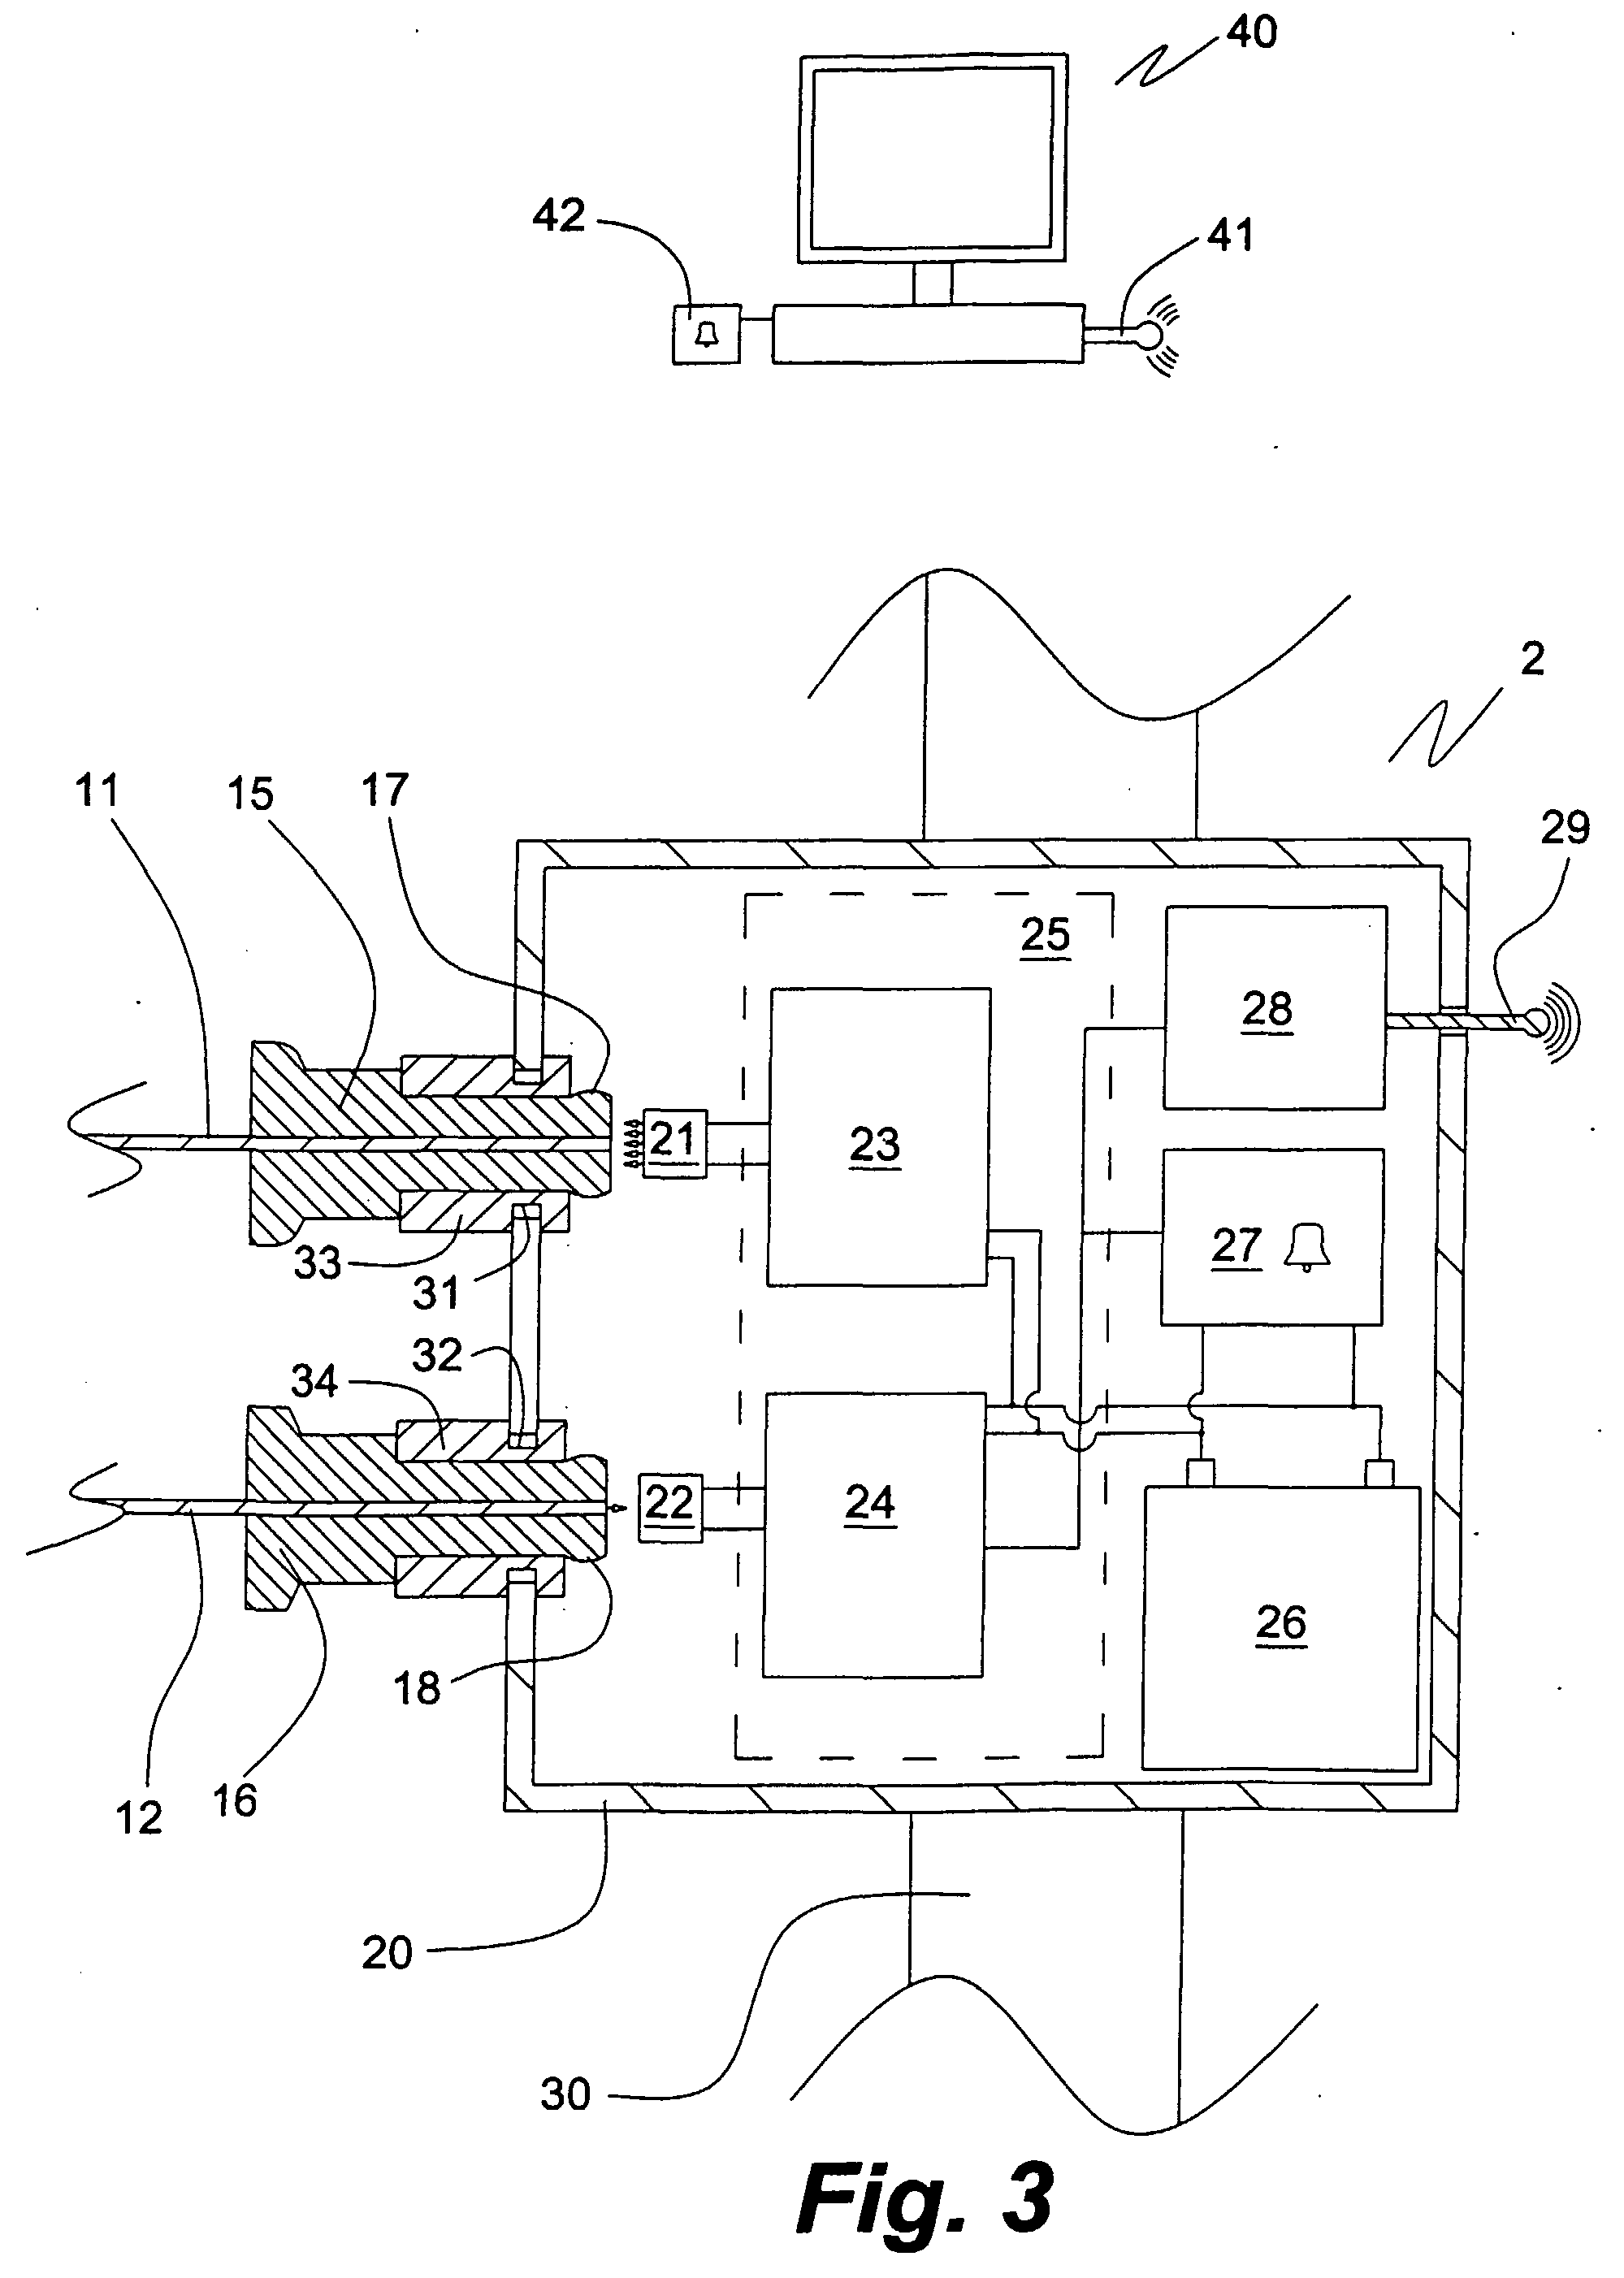 Means and Method for Detection of Blood Leakage from Wounds